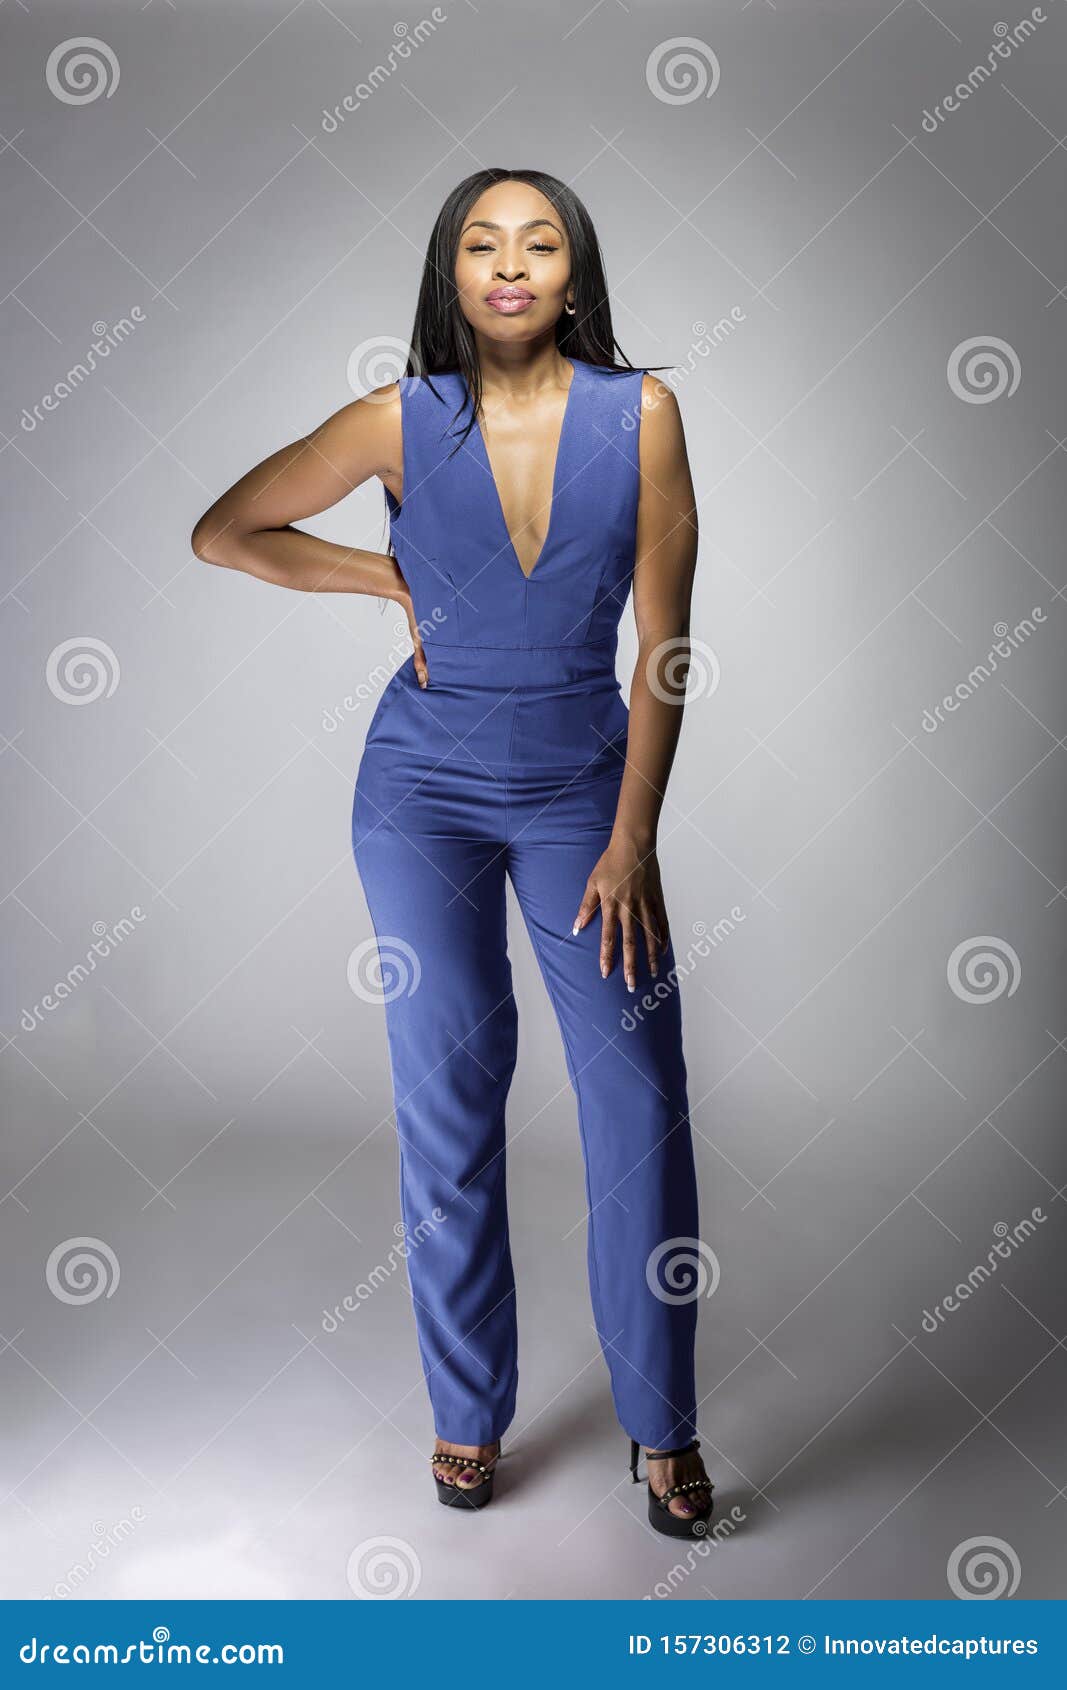 African American Fashion Model Wearing a Blue Jumpsuit Stock Photo ...